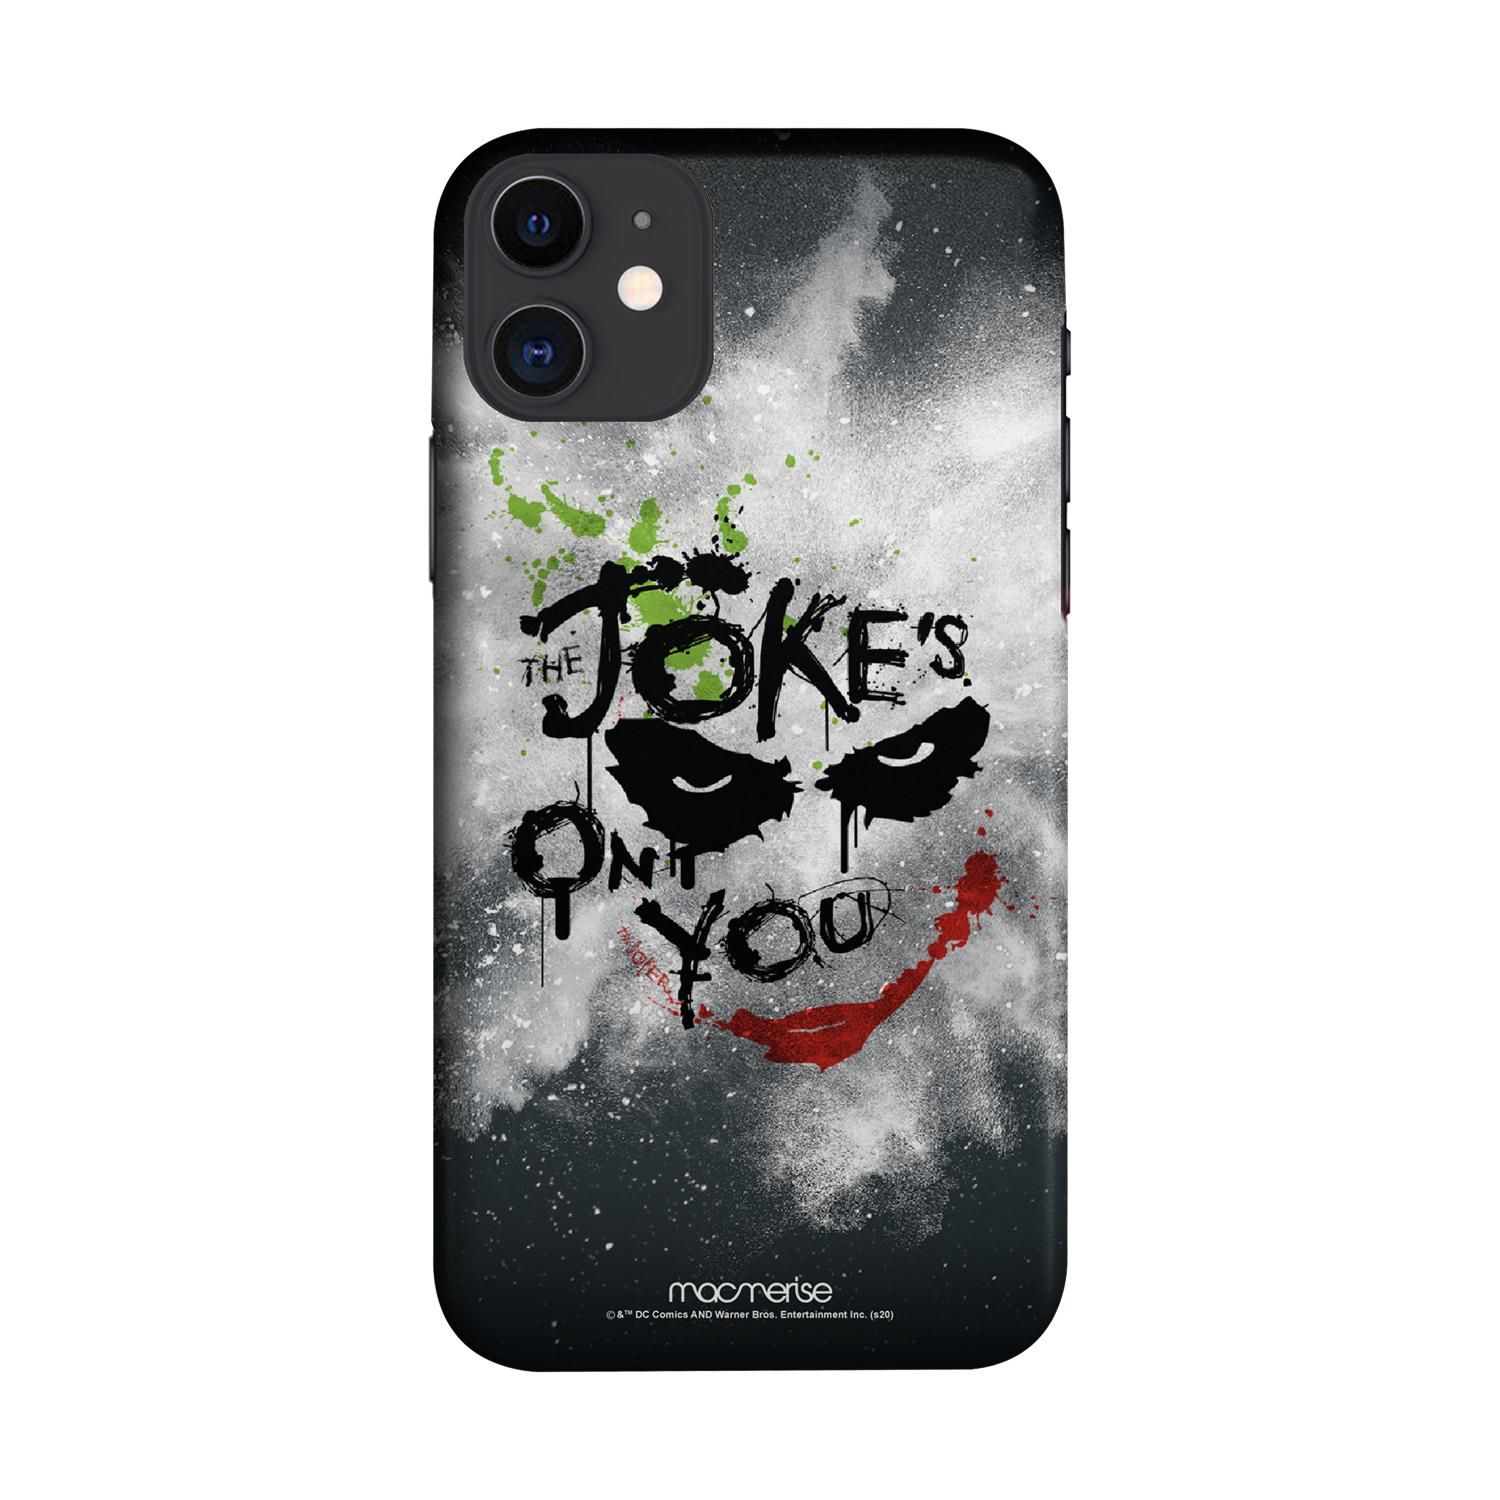 Buy The Jokes on you - Sleek Phone Case for iPhone 11 Online